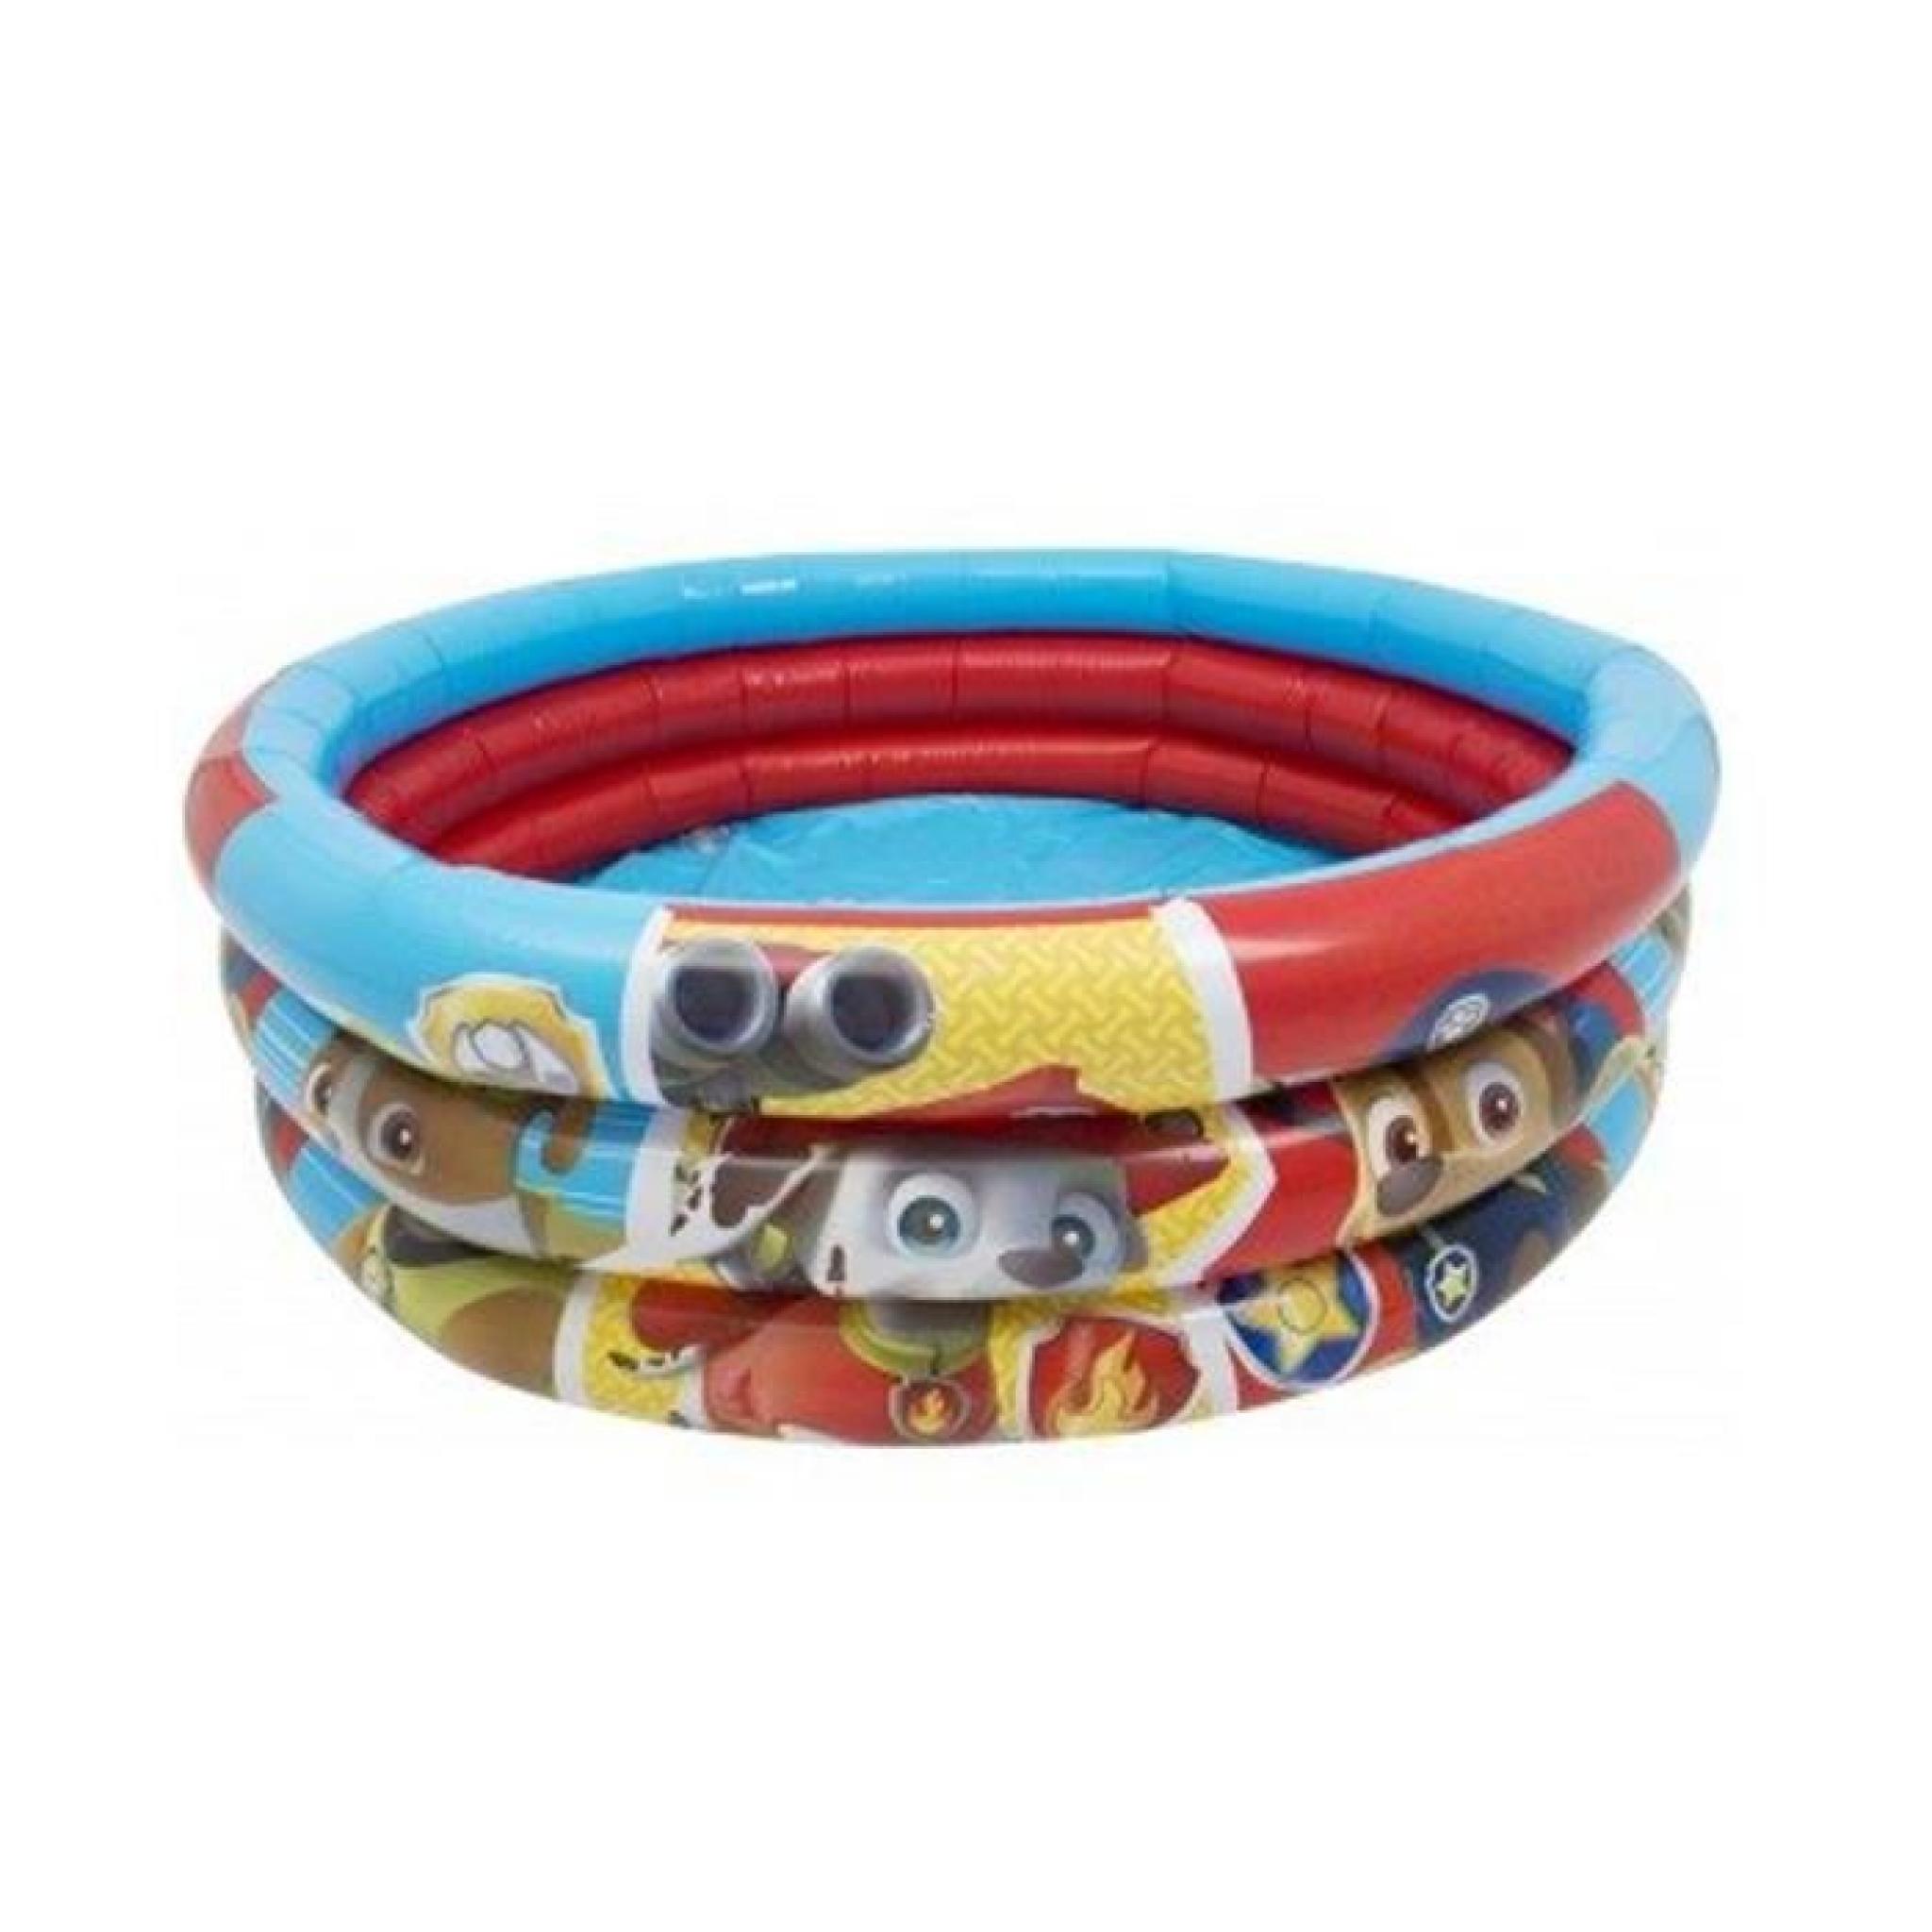 Paw Patrol 3 Ring 100cm piscine gonflable pas cher